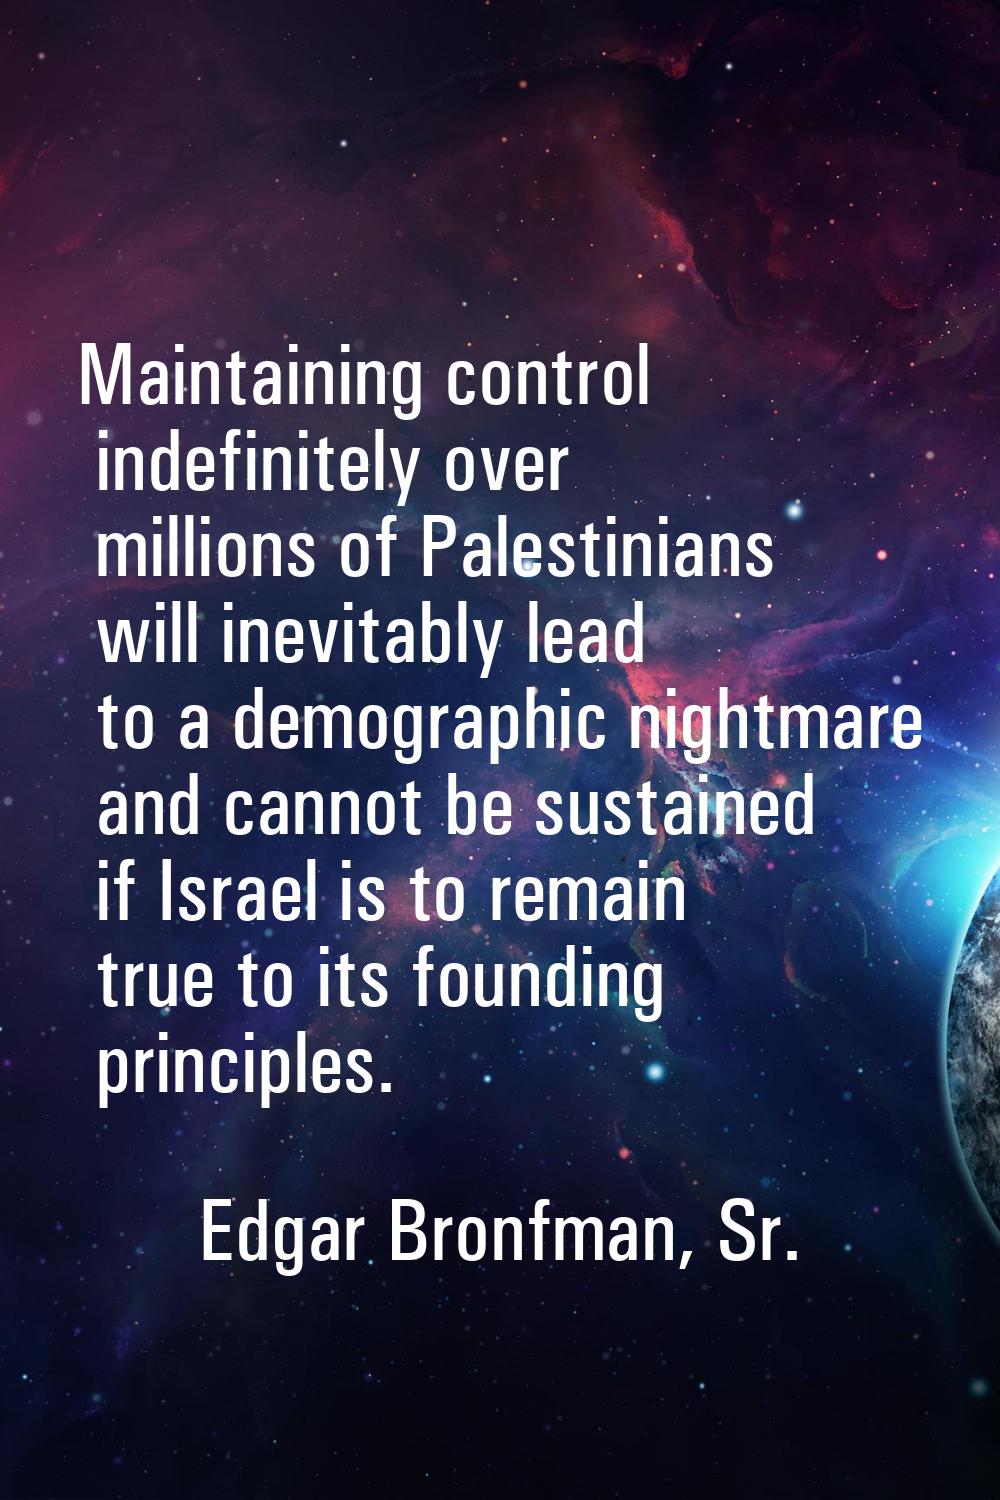 Maintaining control indefinitely over millions of Palestinians will inevitably lead to a demographi